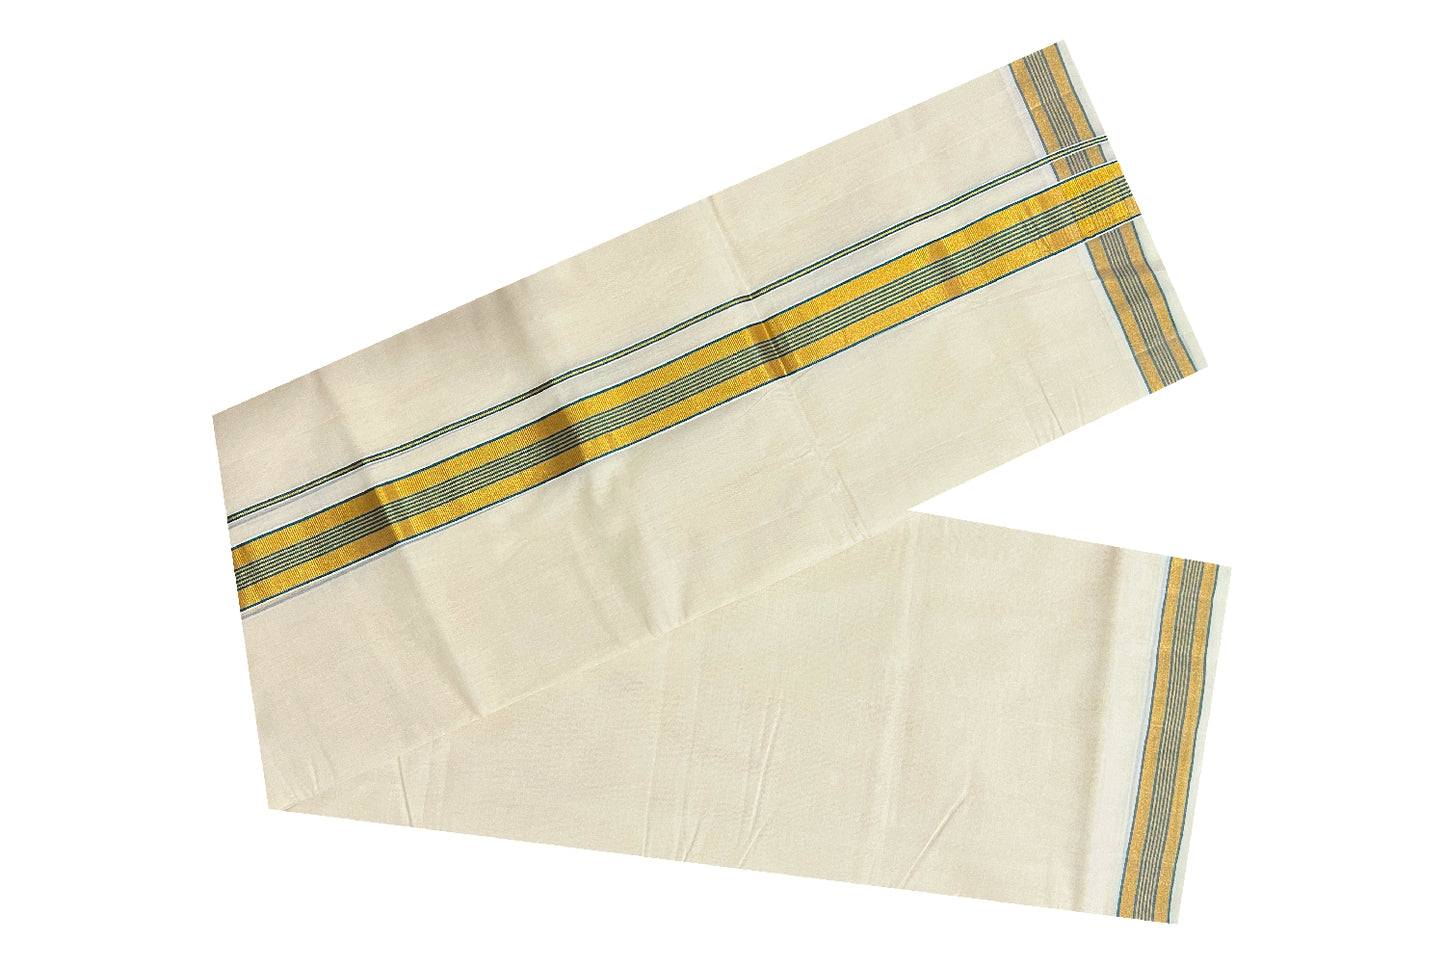 Southloom Kuthampully Handloom Pure Cotton Mundu with Golden and Green Kasavu Line Border (South Indian Dhoti)